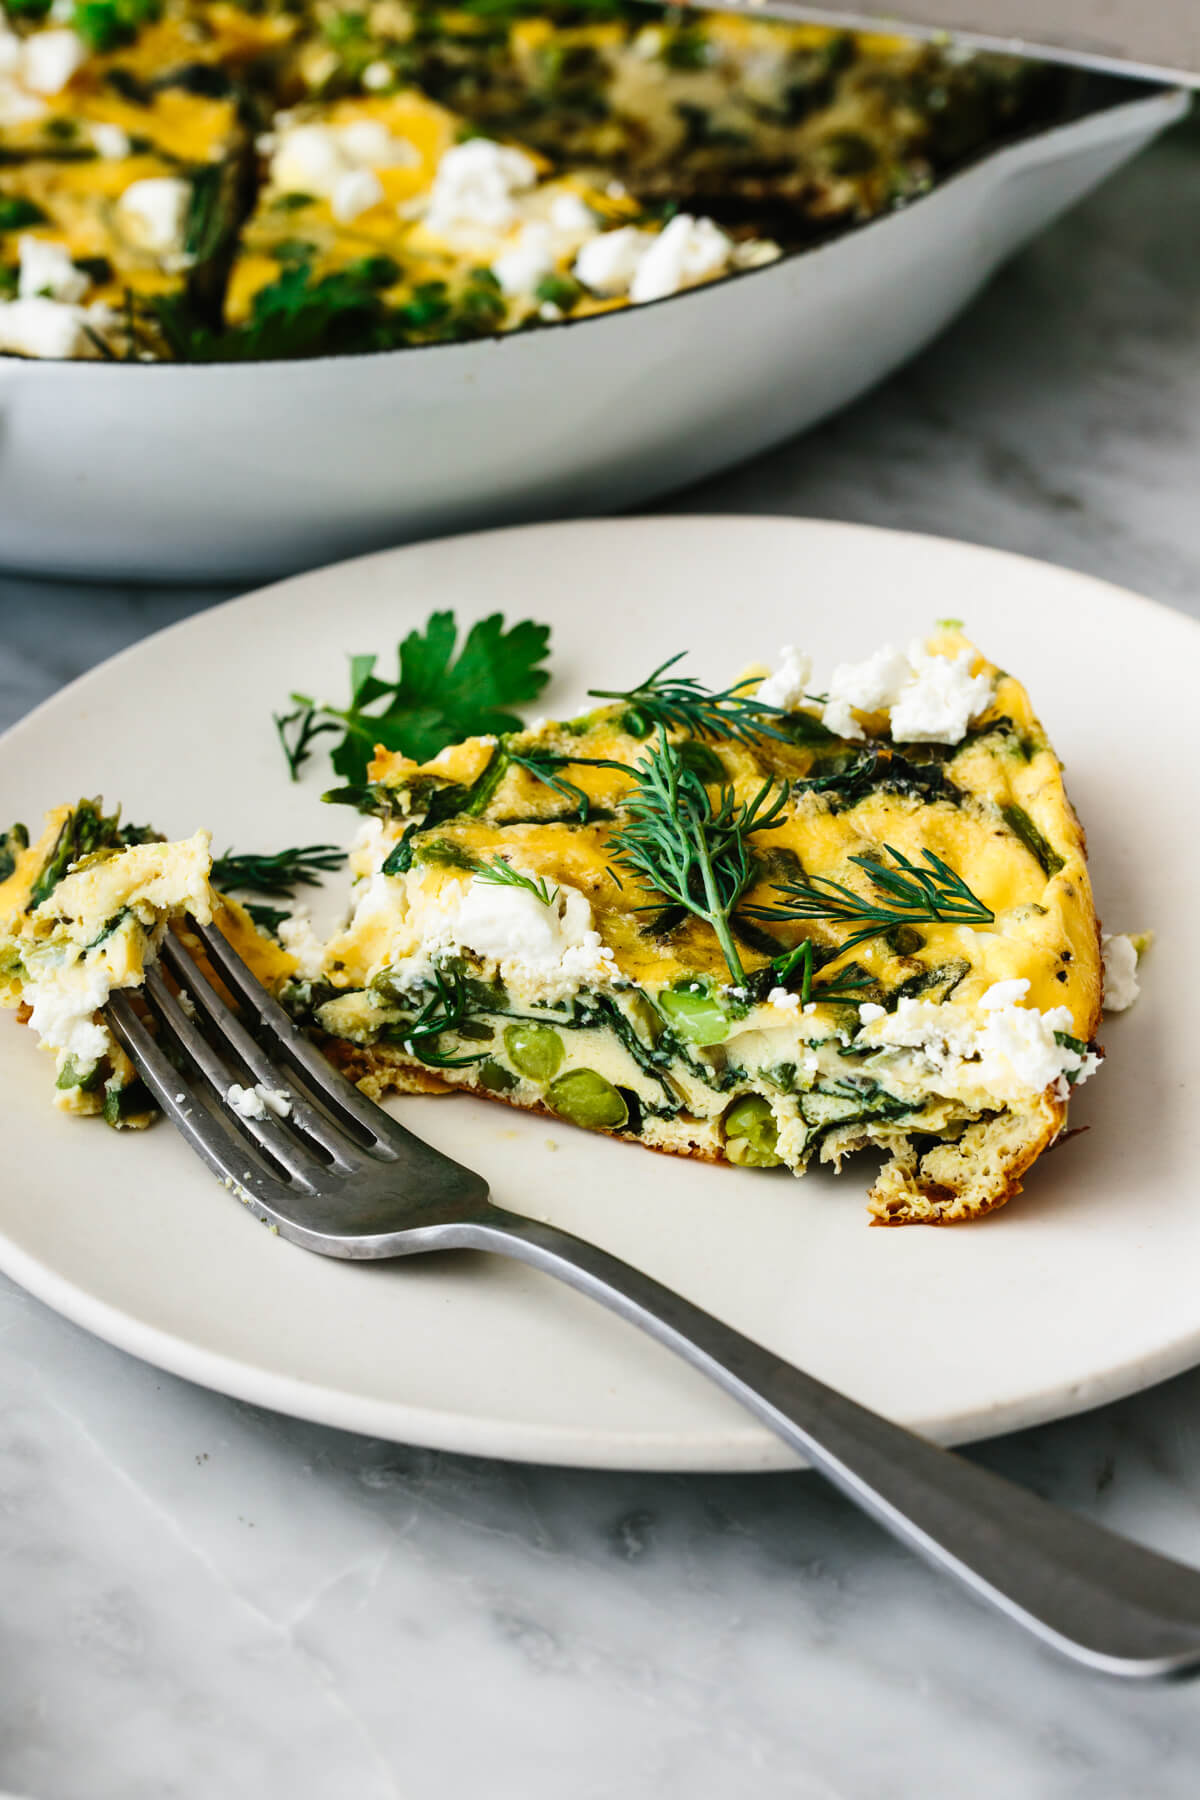 A slice of spring vegetable frittata on a plate